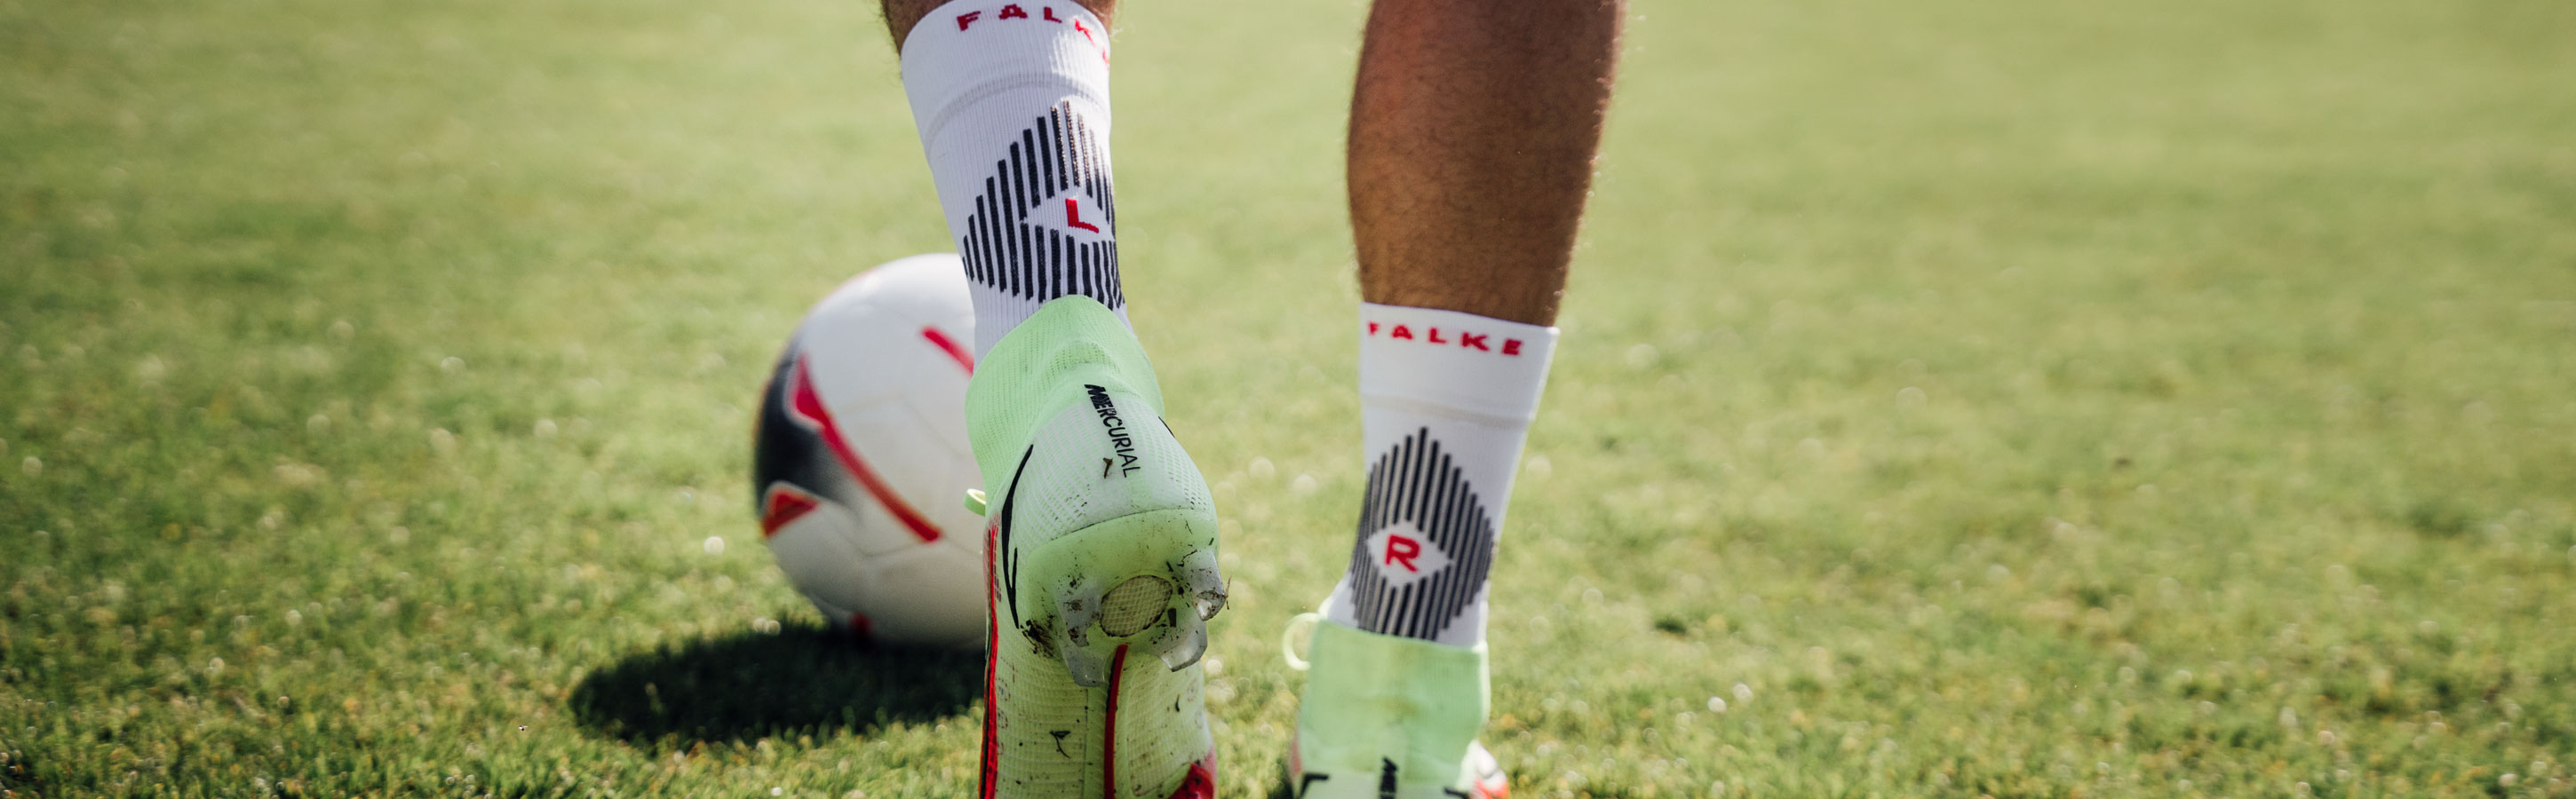 Trusox vs Falke: Which Football Socks are better? Review by